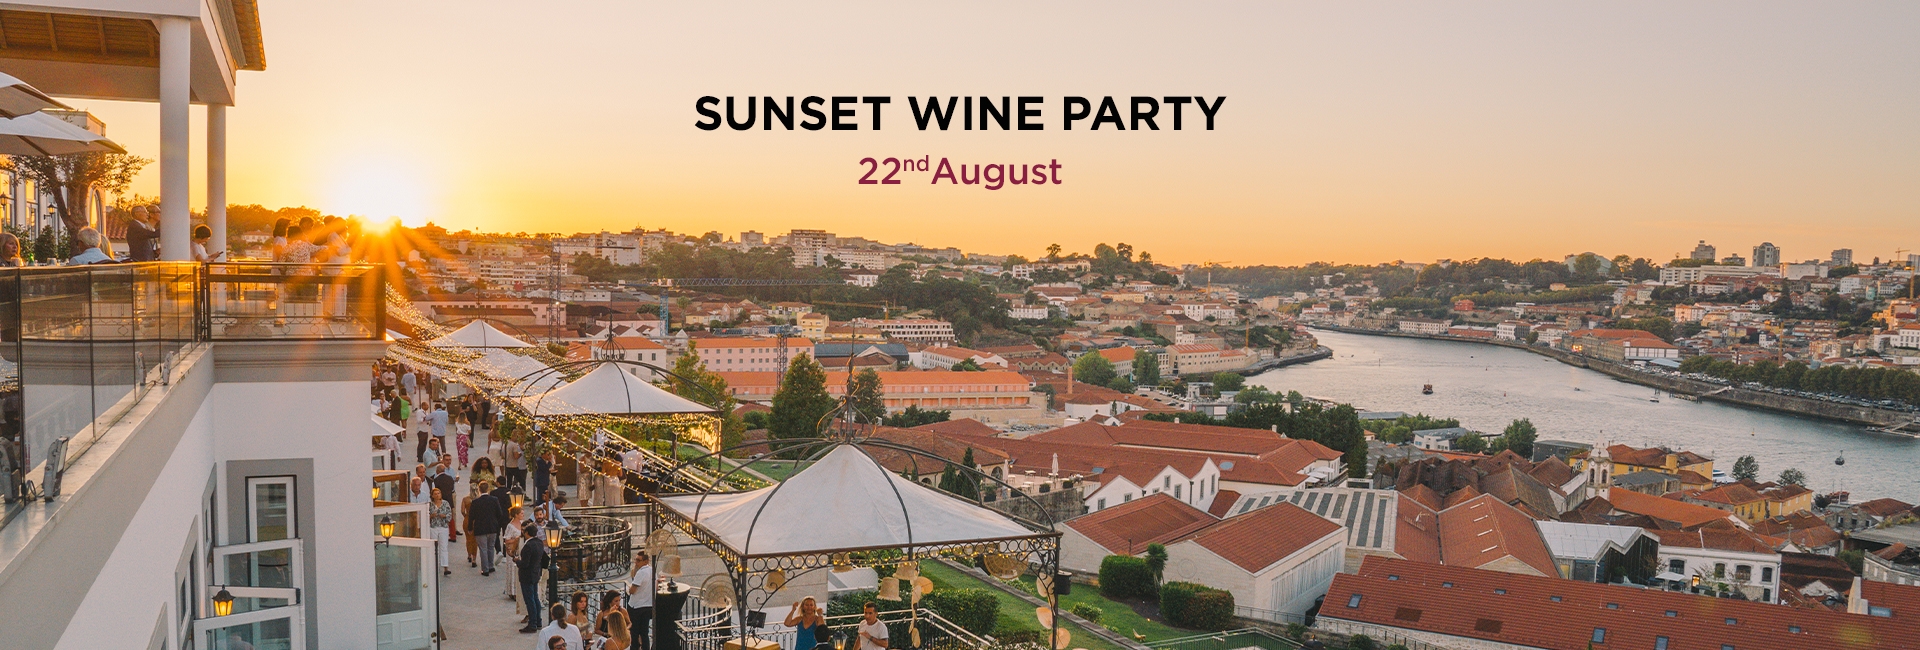 Sunset Wine Party - August